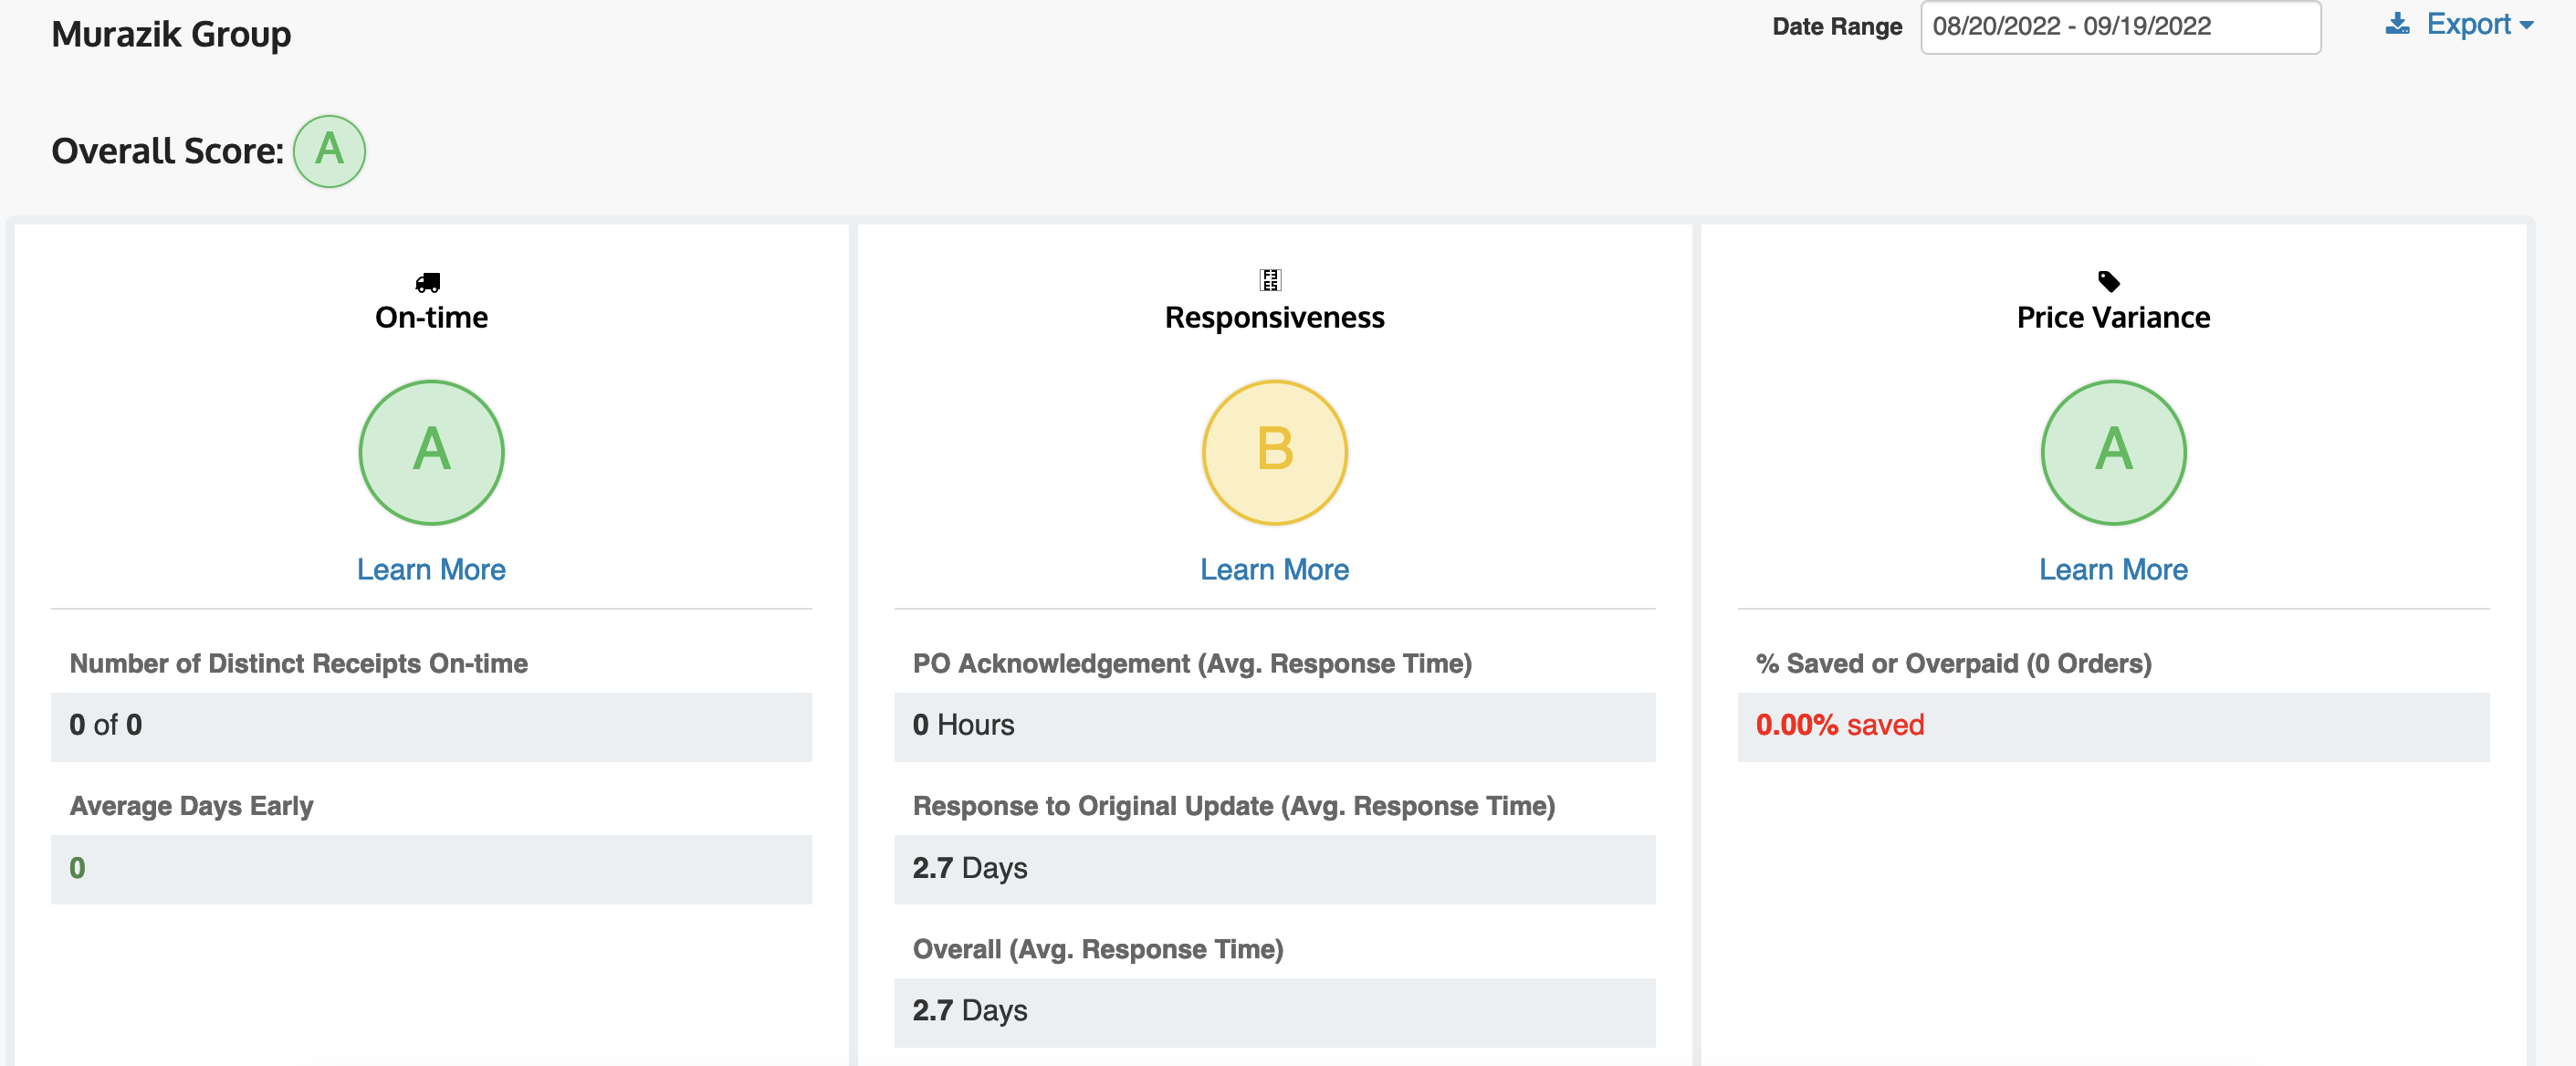 Supplier Scorecarding dashboard view. Measure what matters most to your business and hold suppliers accountable with configurable scorecards that look at metrics like on-time delivery and responsiveness.